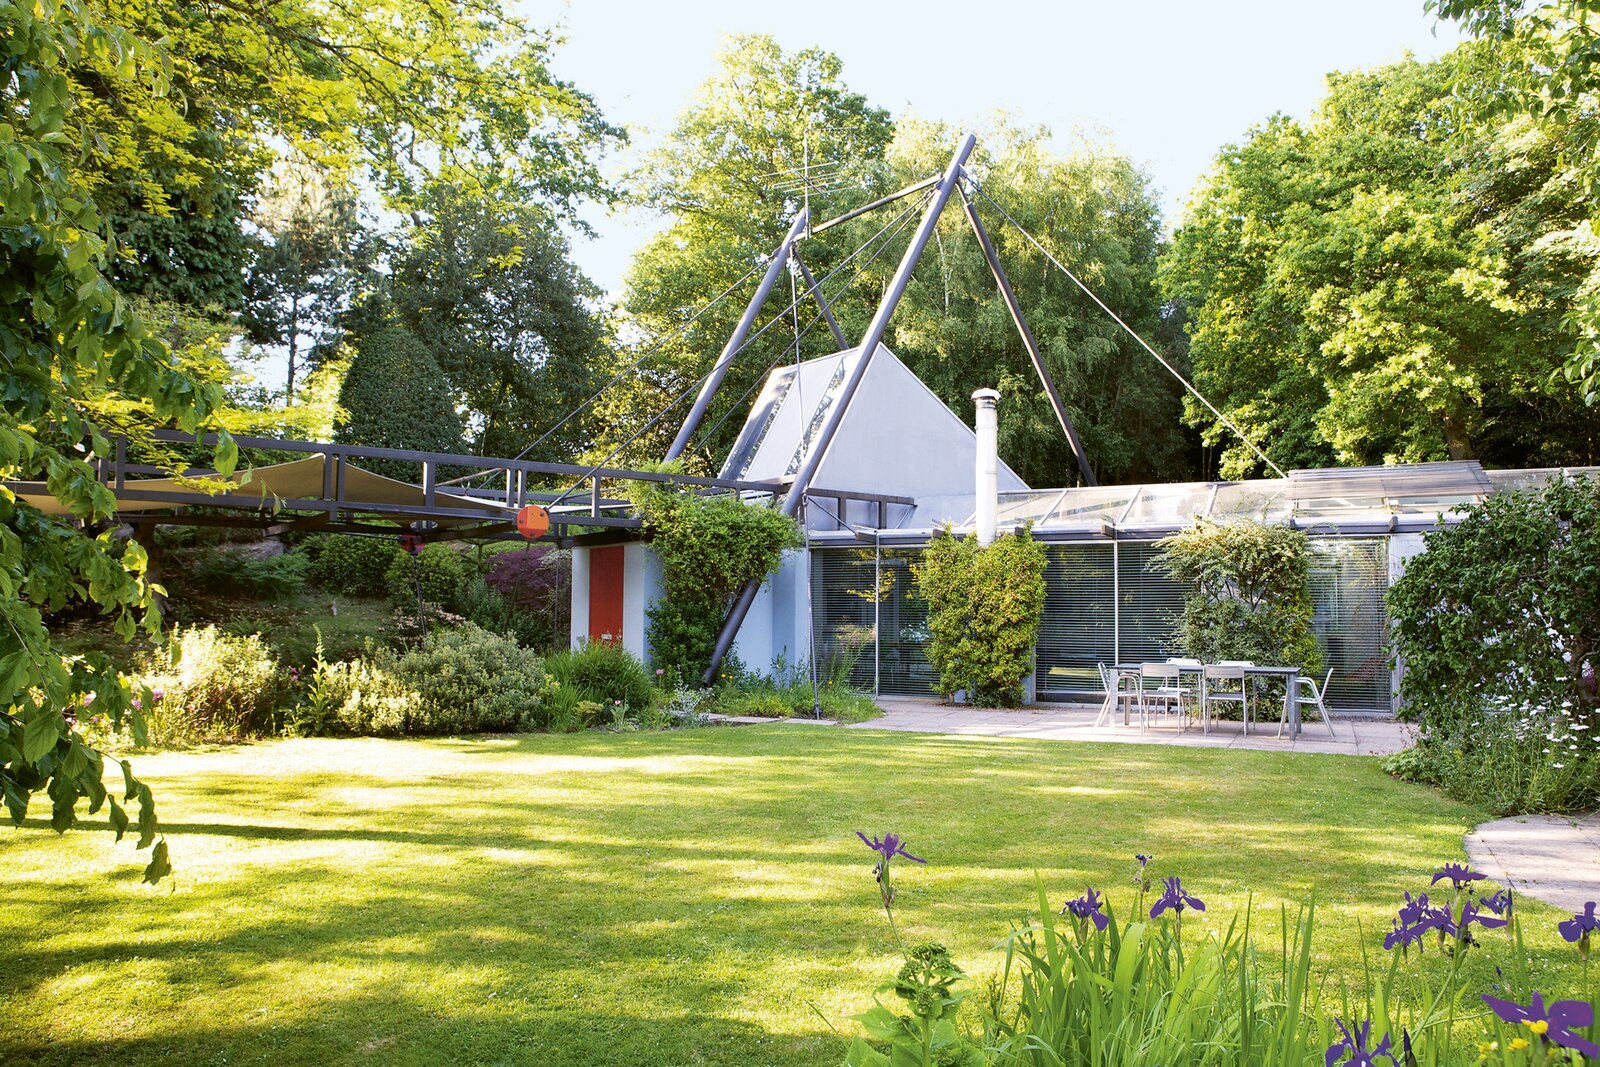 10 Wildly Innovative U.K. Homes of the 20th Century That Outshine the Rest